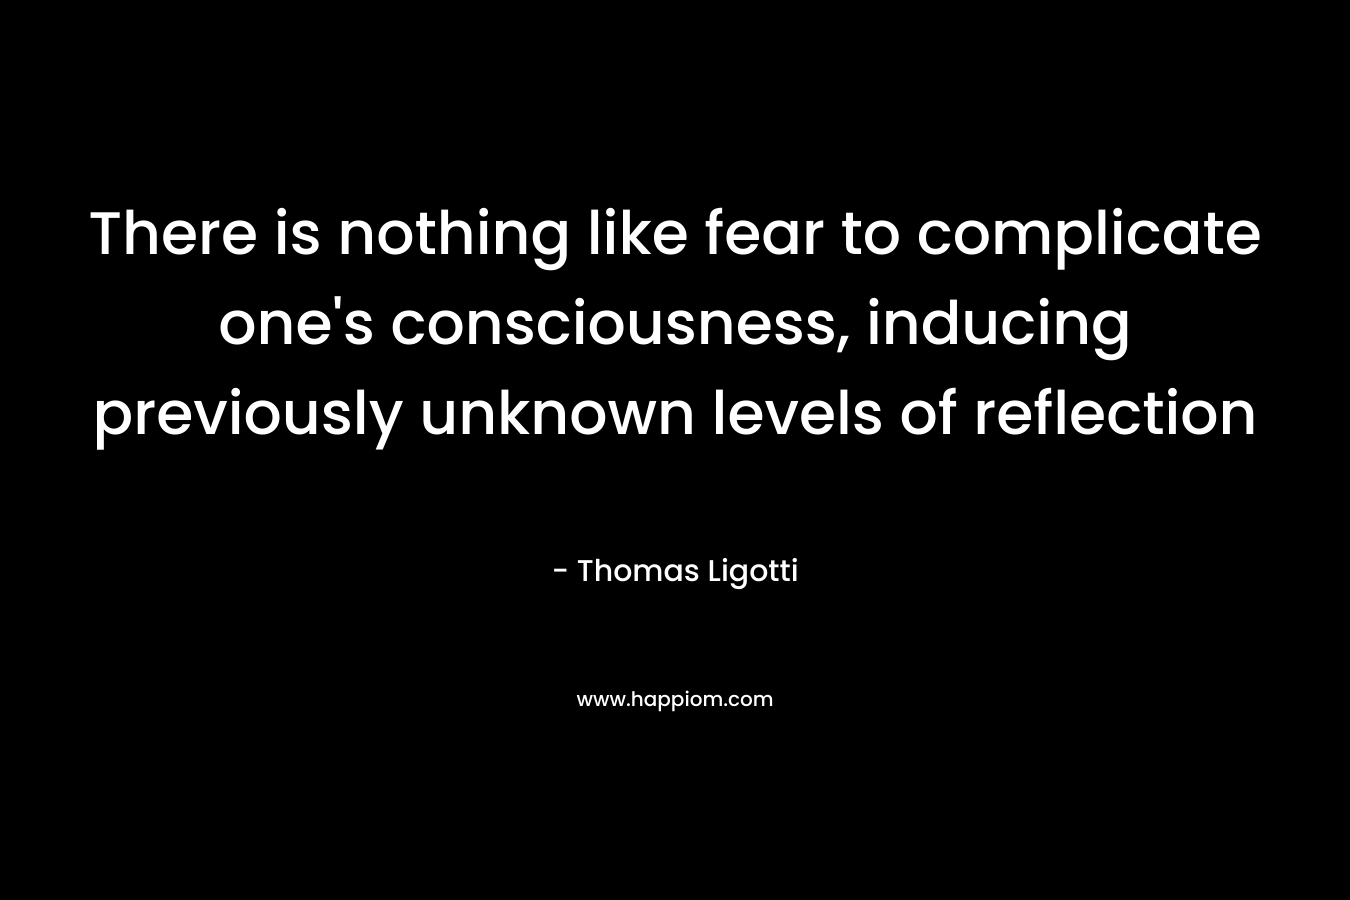 There is nothing like fear to complicate one's consciousness, inducing previously unknown levels of reflection